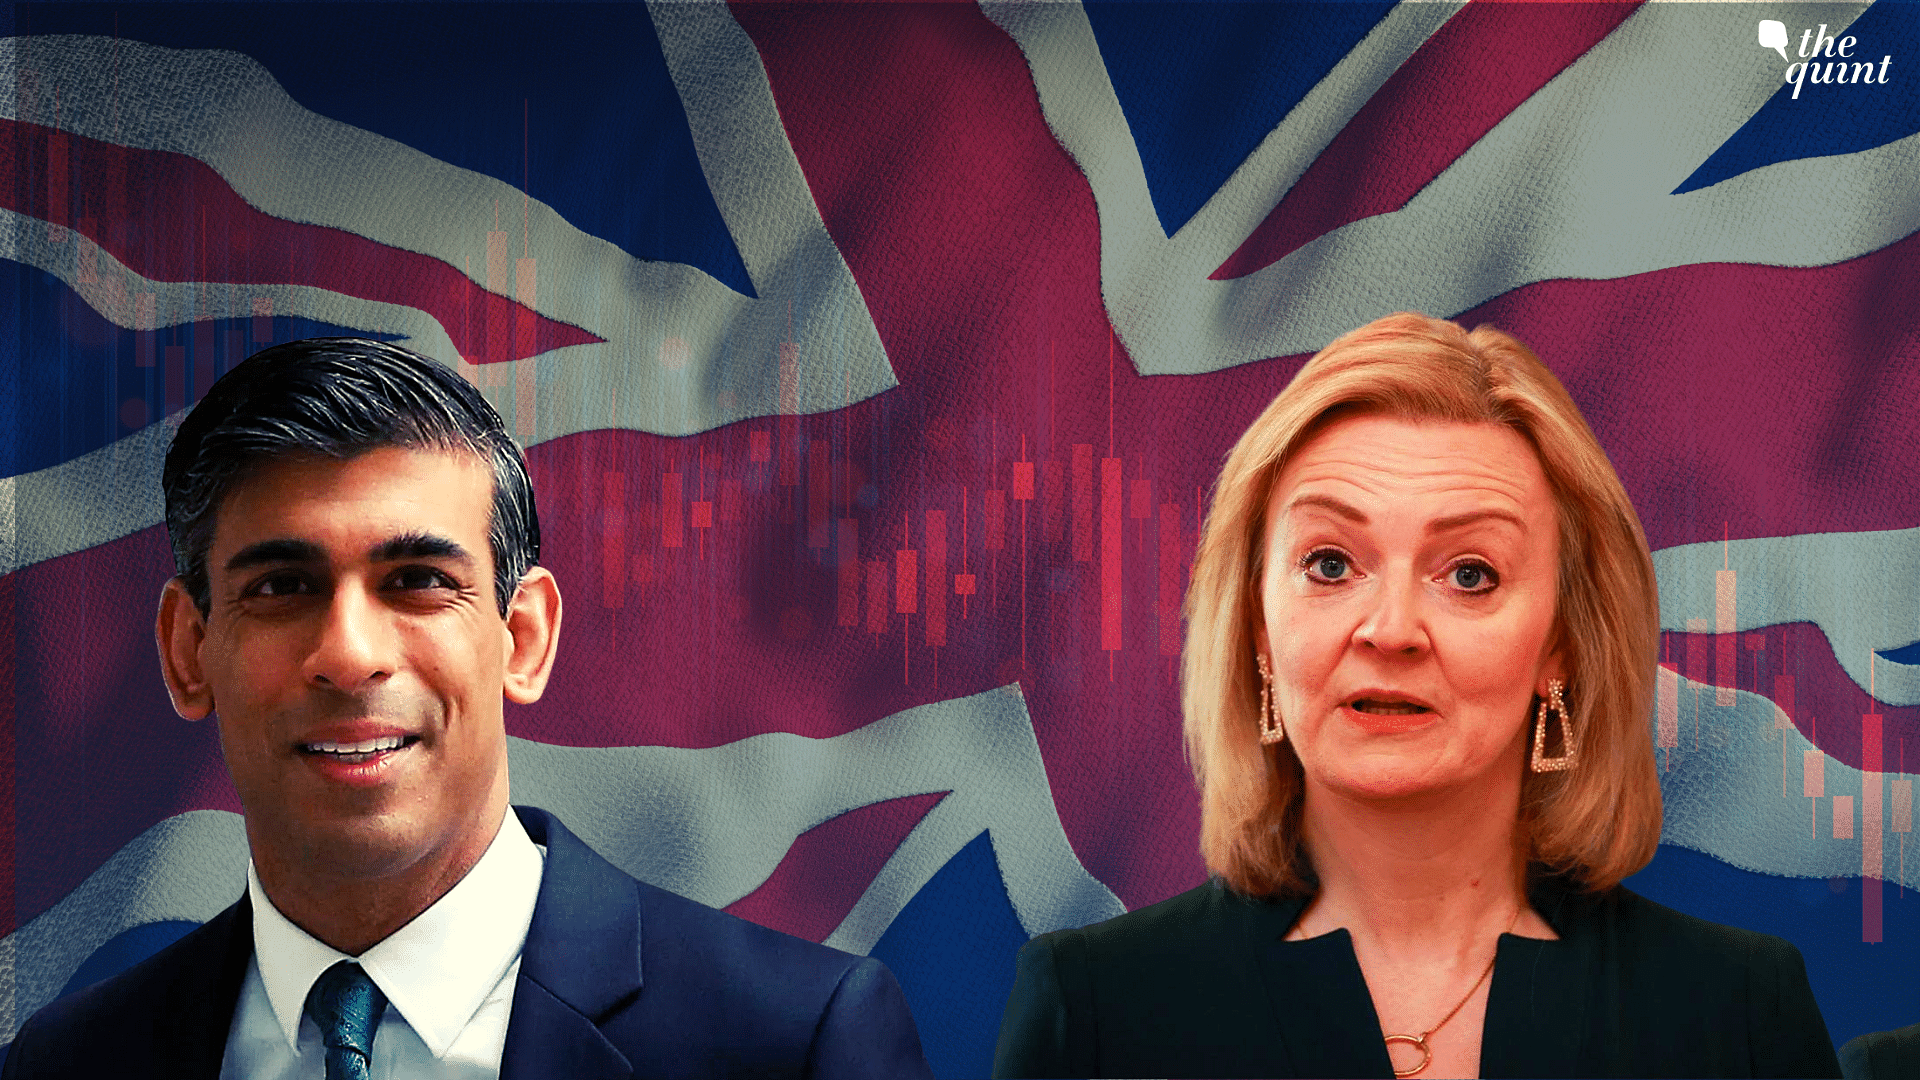 <div class="paragraphs"><p>The <a href="https://www.thequint.com/topic/uk-economy">United Kingdom’s economy</a> was in crisis after Prime Minister <a href="https://www.thequint.com/topic/liz-truss">Liz Truss</a> brought on her now-reversed $50 billion ( £45 billion) tax cuts package that has left the country’s economy in disarray.</p></div>